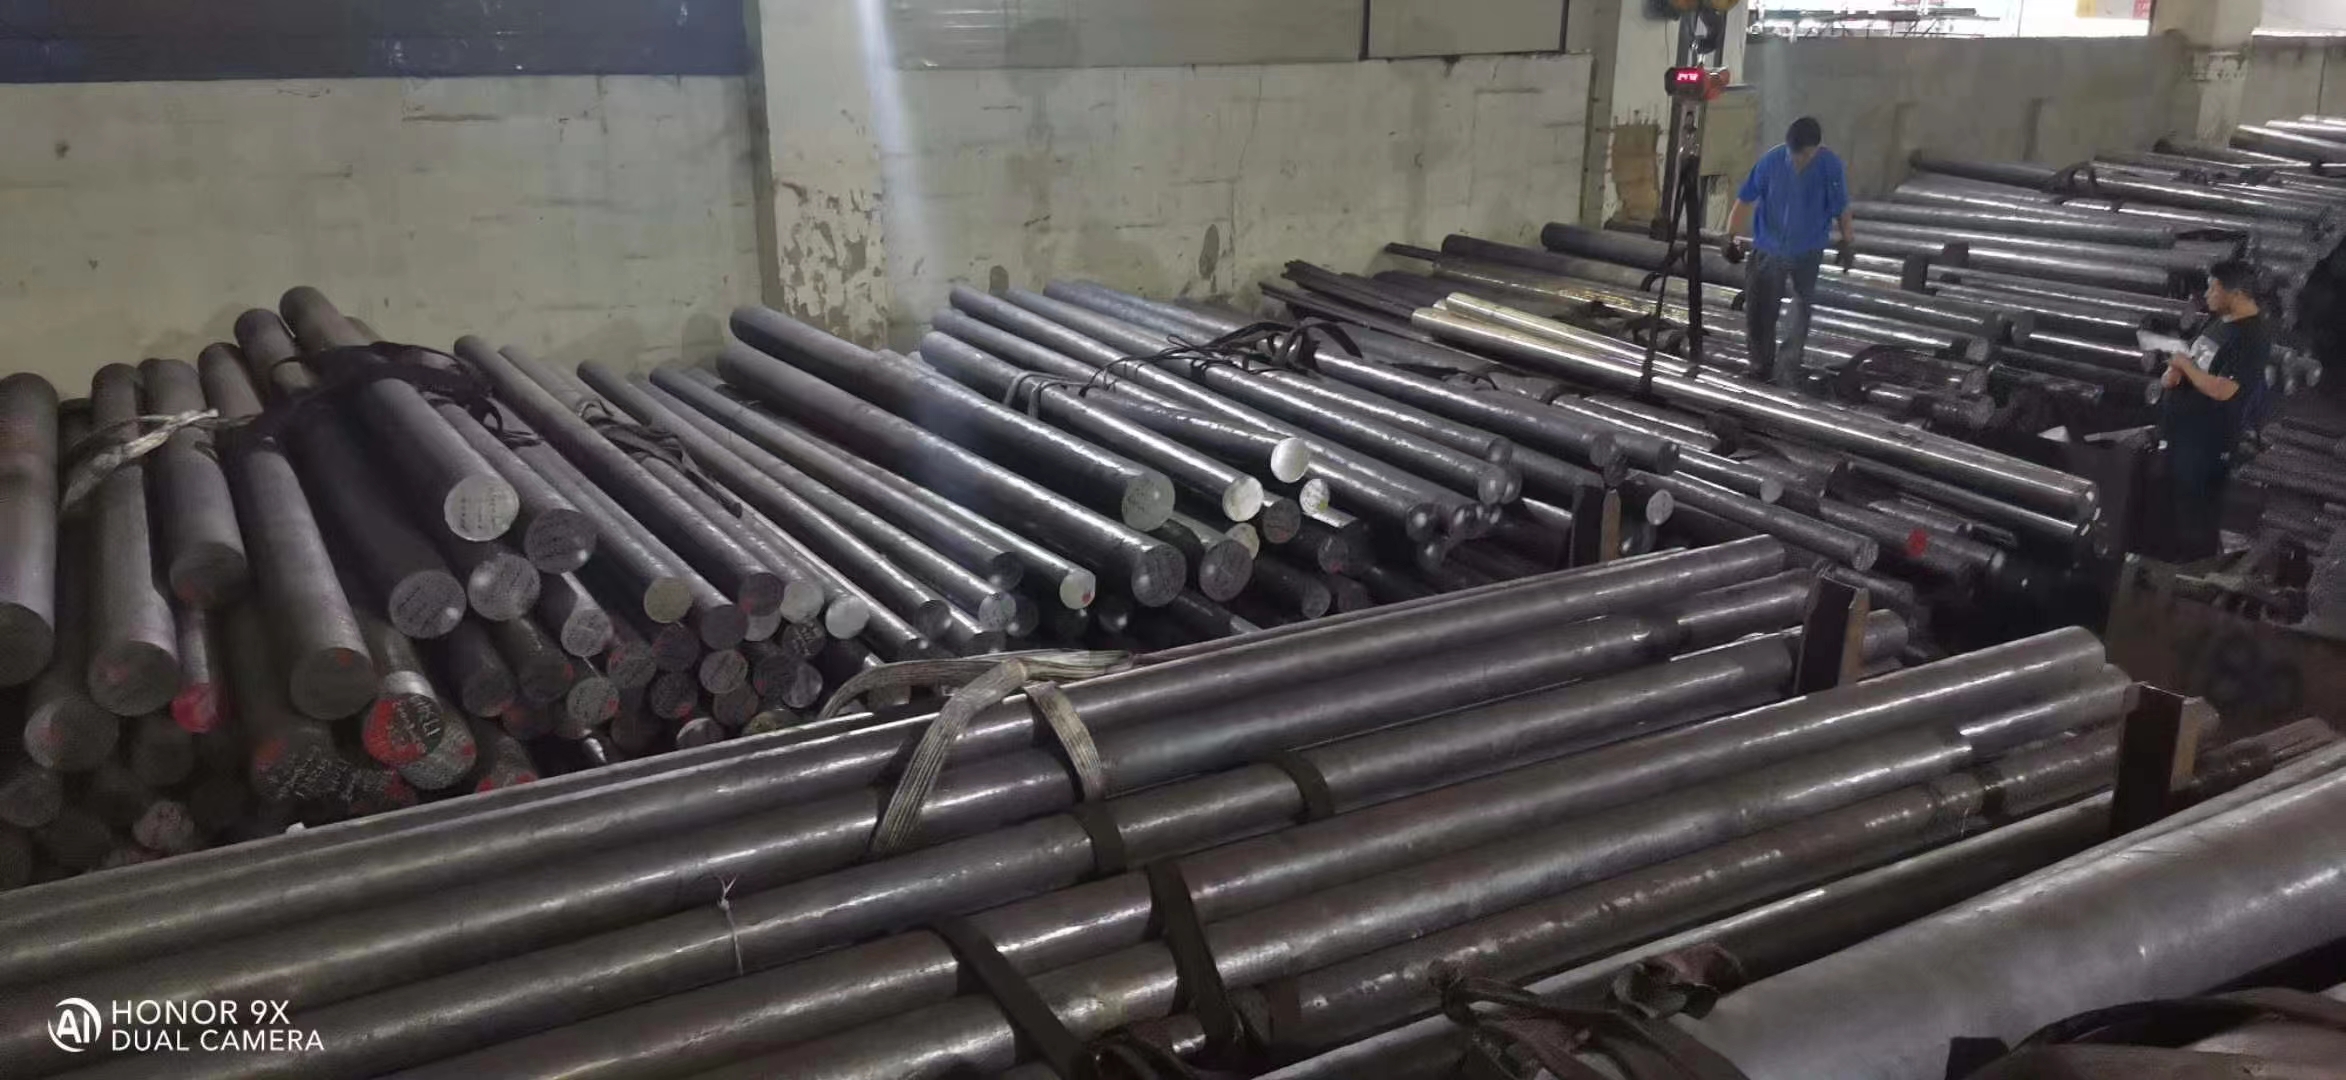 Carbon Steel Round Bar Q235b Q355 4340 C50 C60 S50c S60c Carbon Steel Bar 1060 Steel Price Rod Prime Quality Fast Delivery